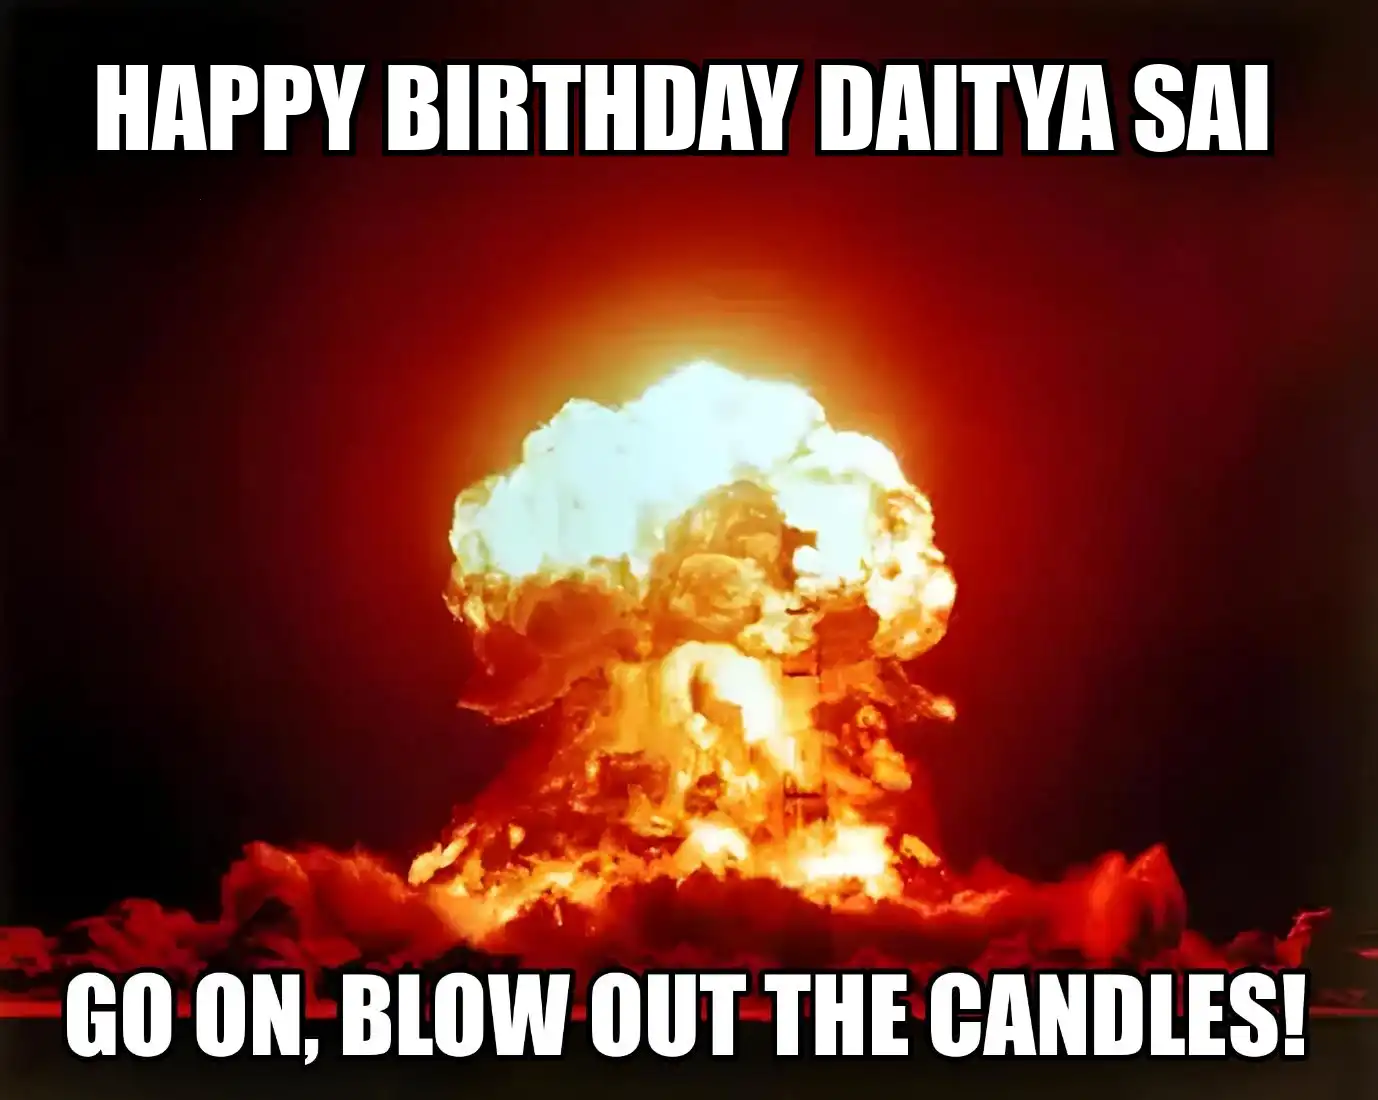 Happy Birthday Daitya Sai Go On Blow Out The Candles Meme